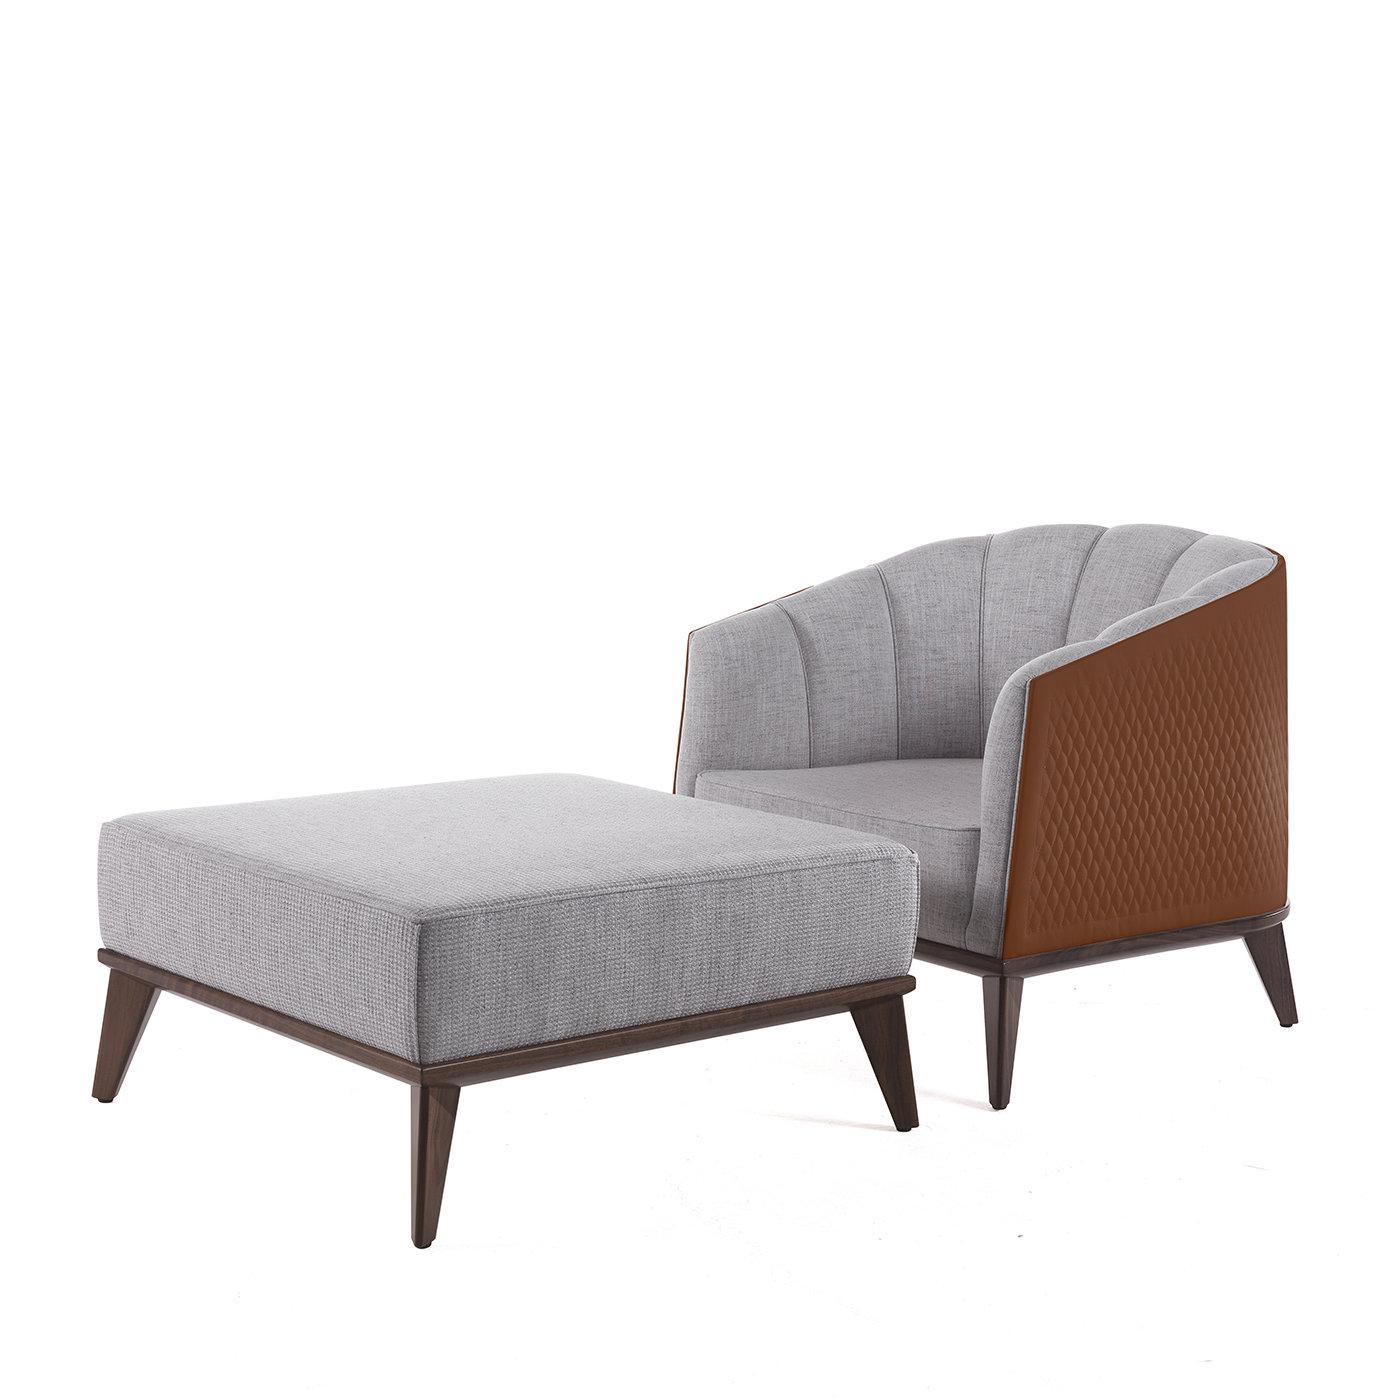 Part of the Roy Collection which includes a 3- and 2-seater sofa and an ottoman, this armchair epitomizes modern sophistication. Detailed with diamond-embroidered brown leather on the external back, the seat is upholstered in heather gray fabric